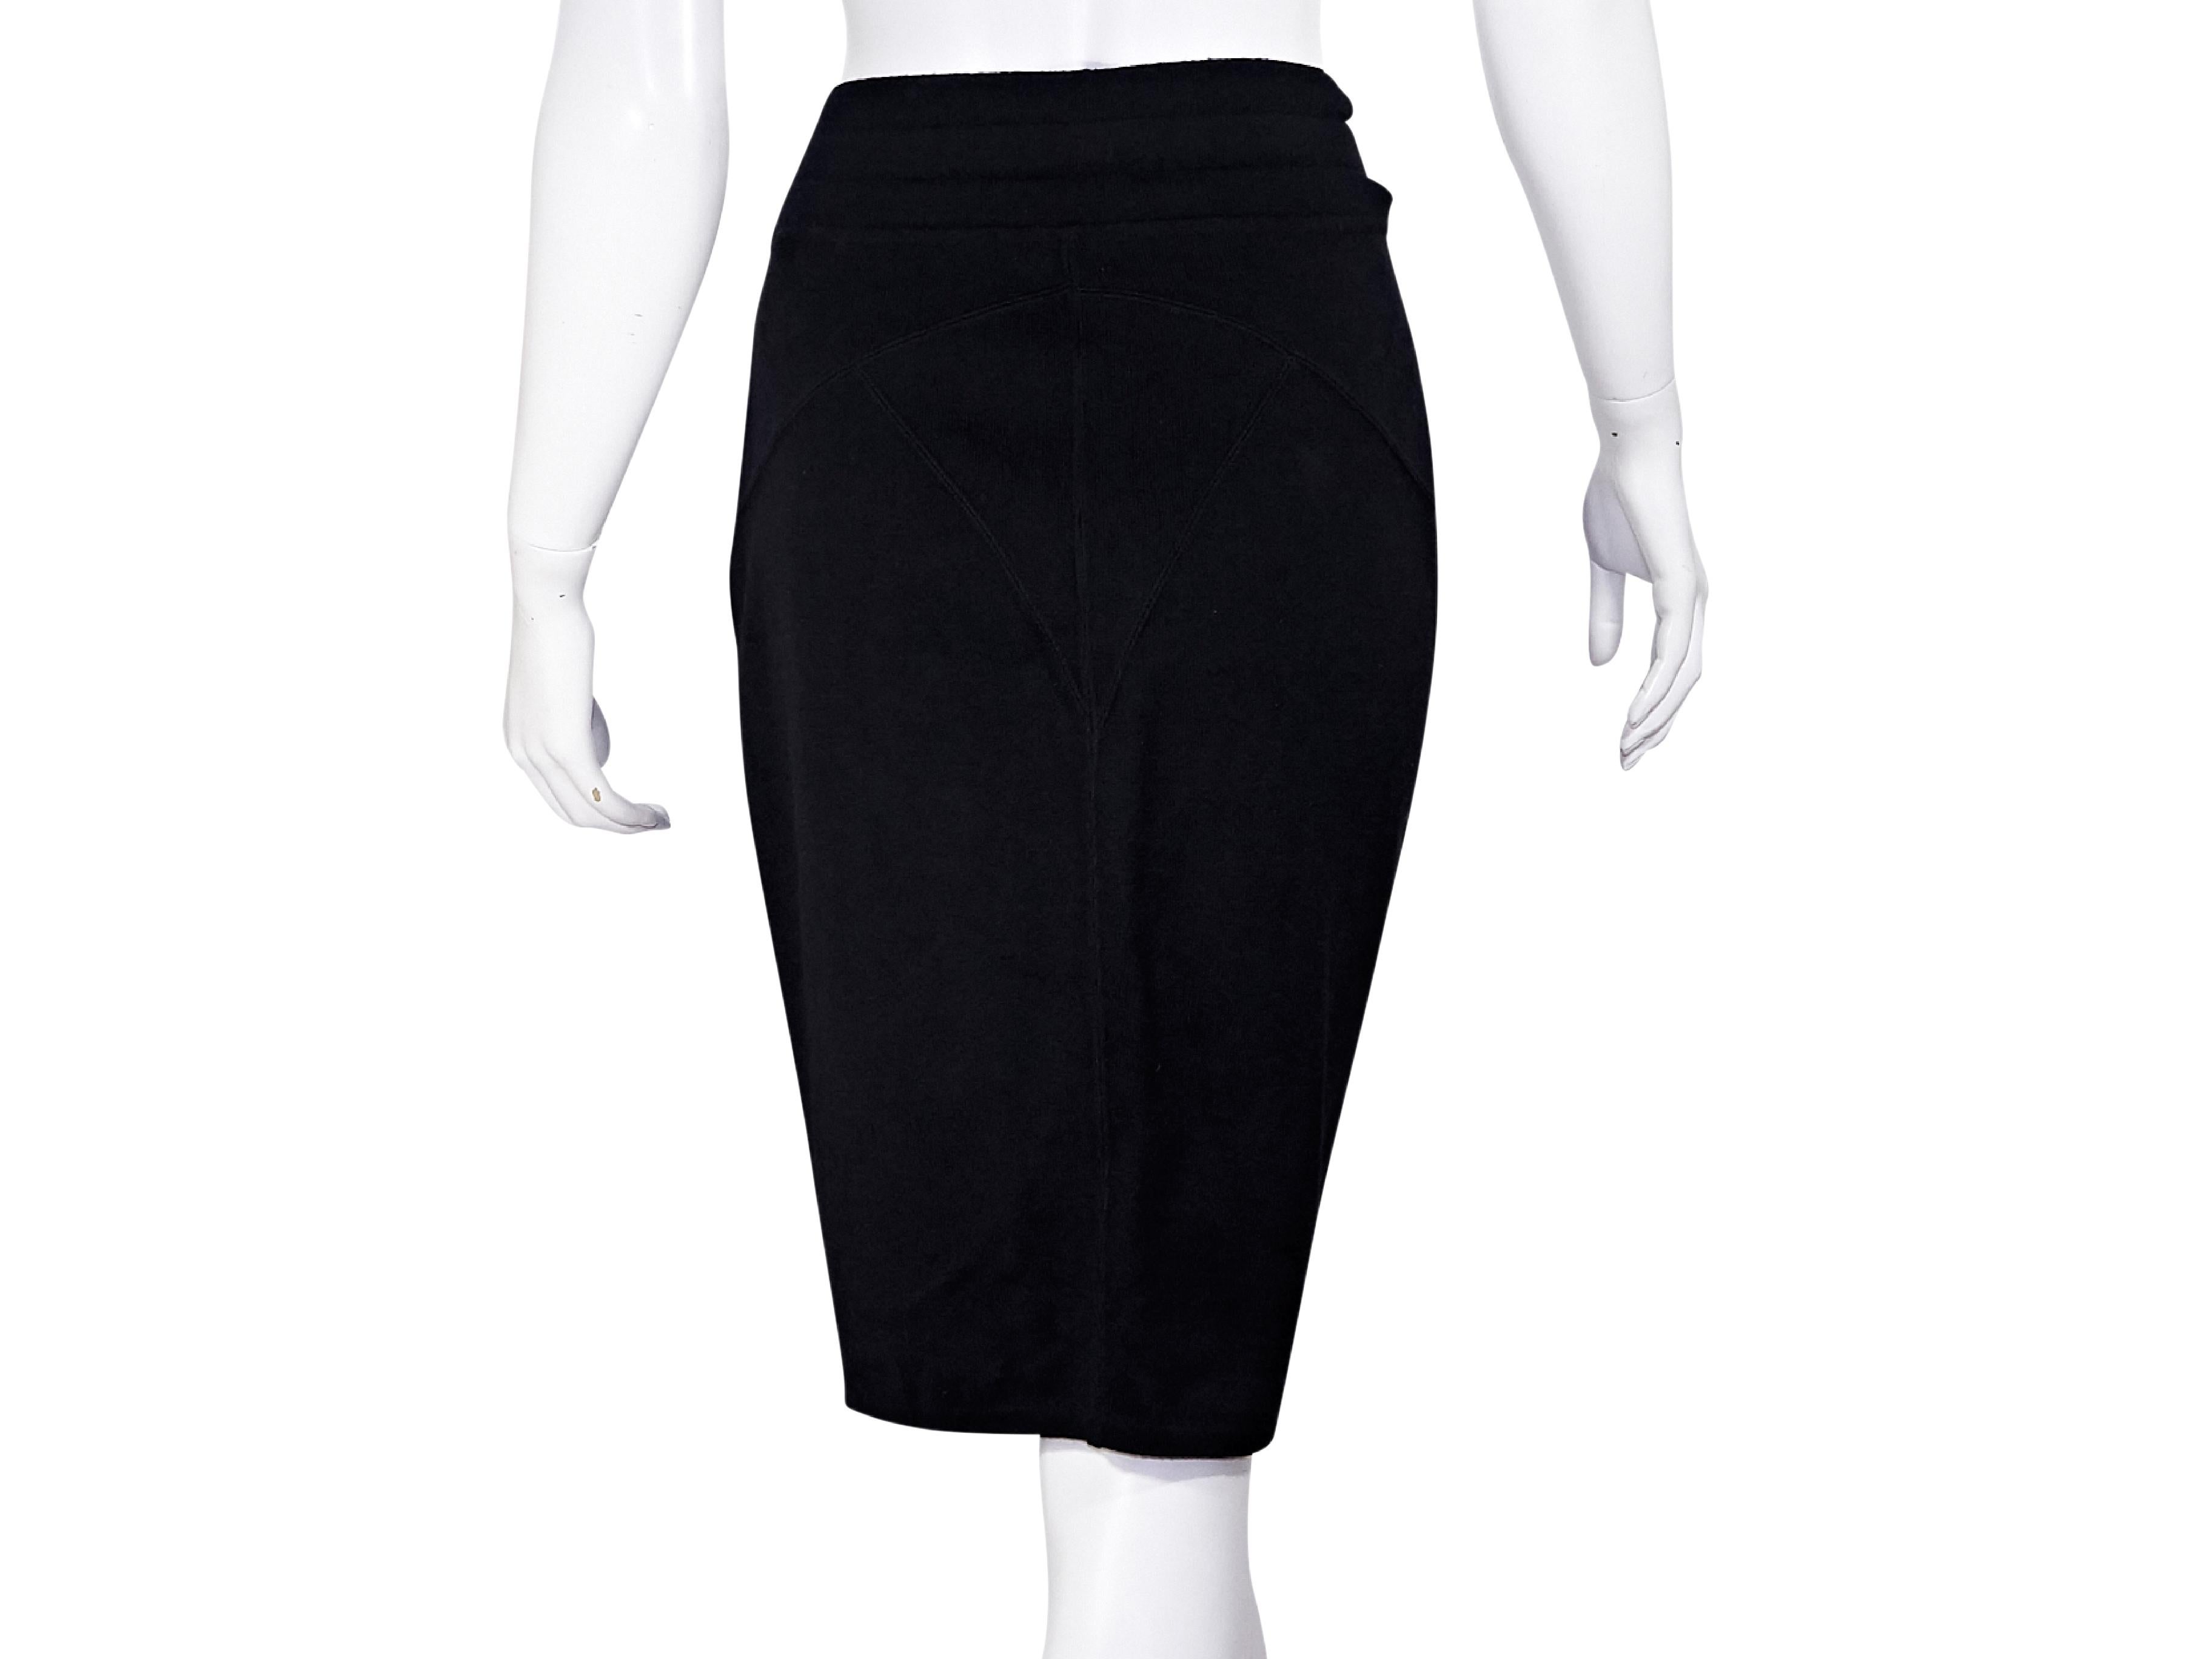 Product details:  Vintage black pencil skirt by Alaia.  Stretch fit.  Pull-on style.  28